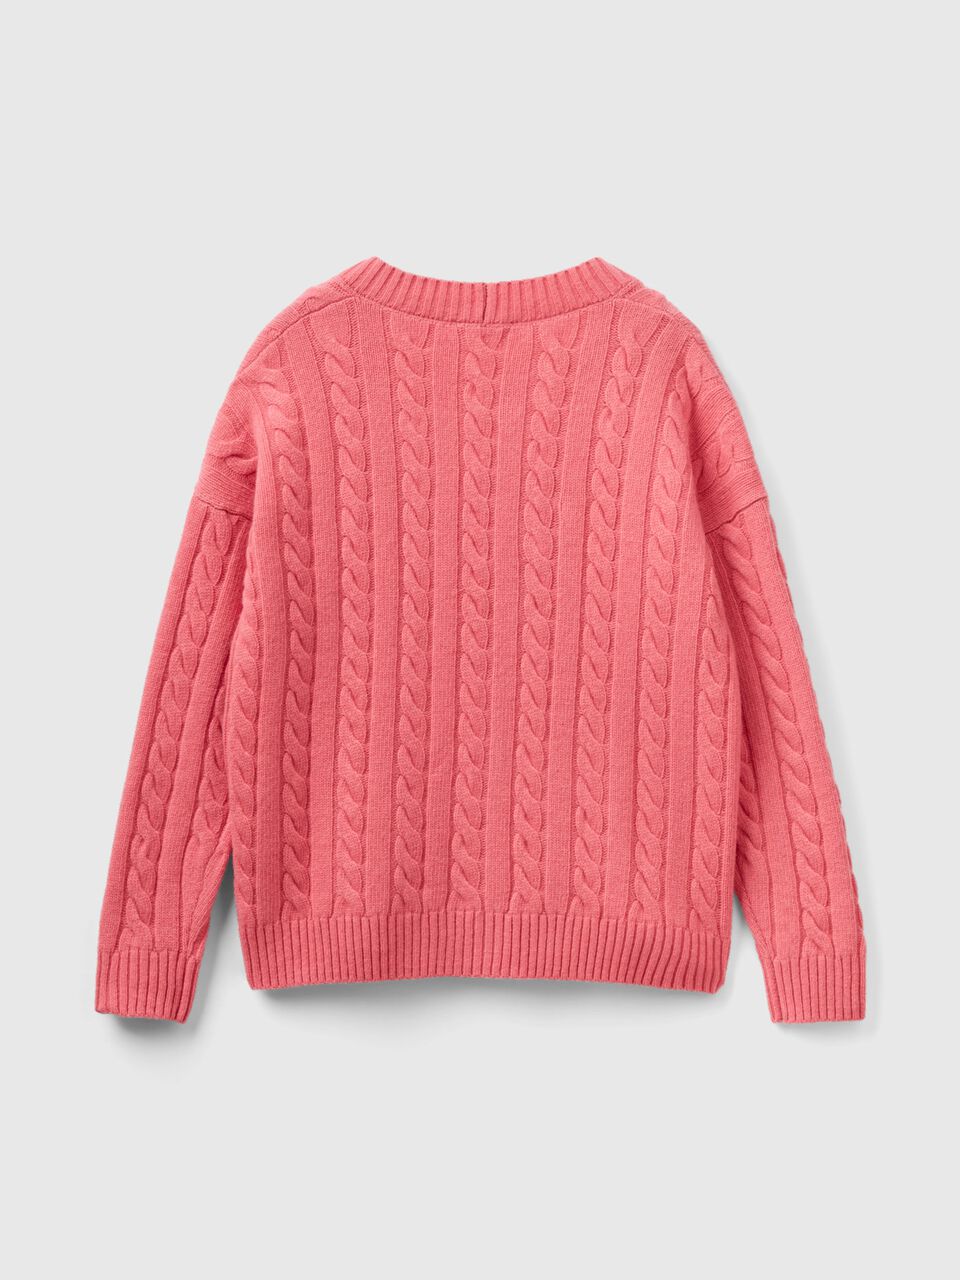 H&M+ Oversized Cable-knit Sweater - Light pink - Ladies